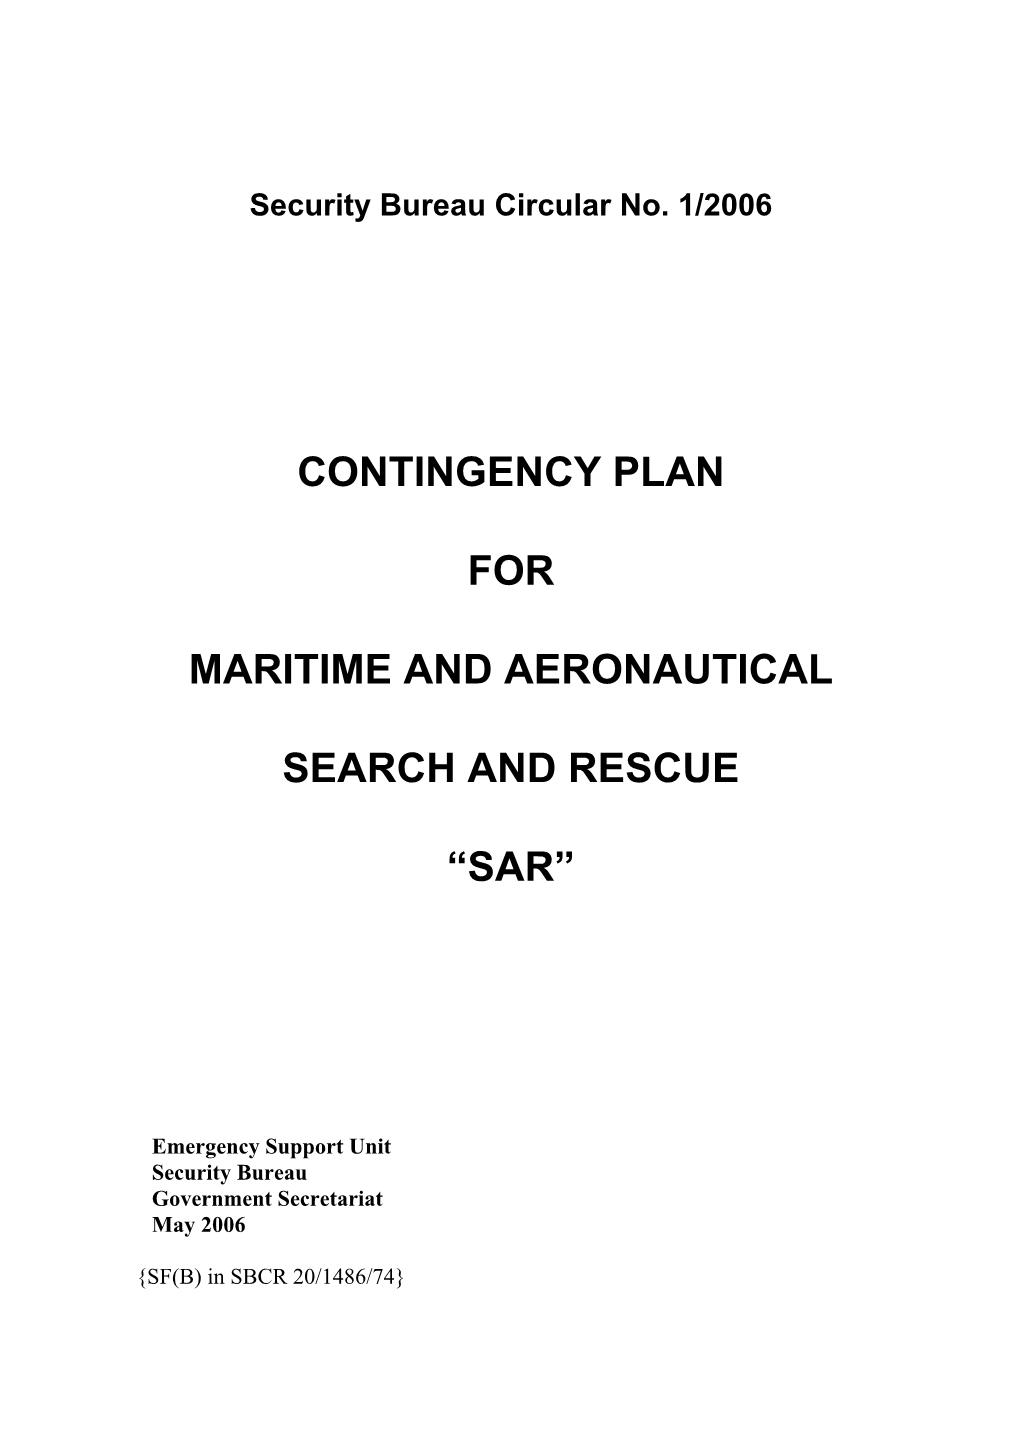 Contingency Plan for Maritime and Aeronautical Search and Rescue “SAR”